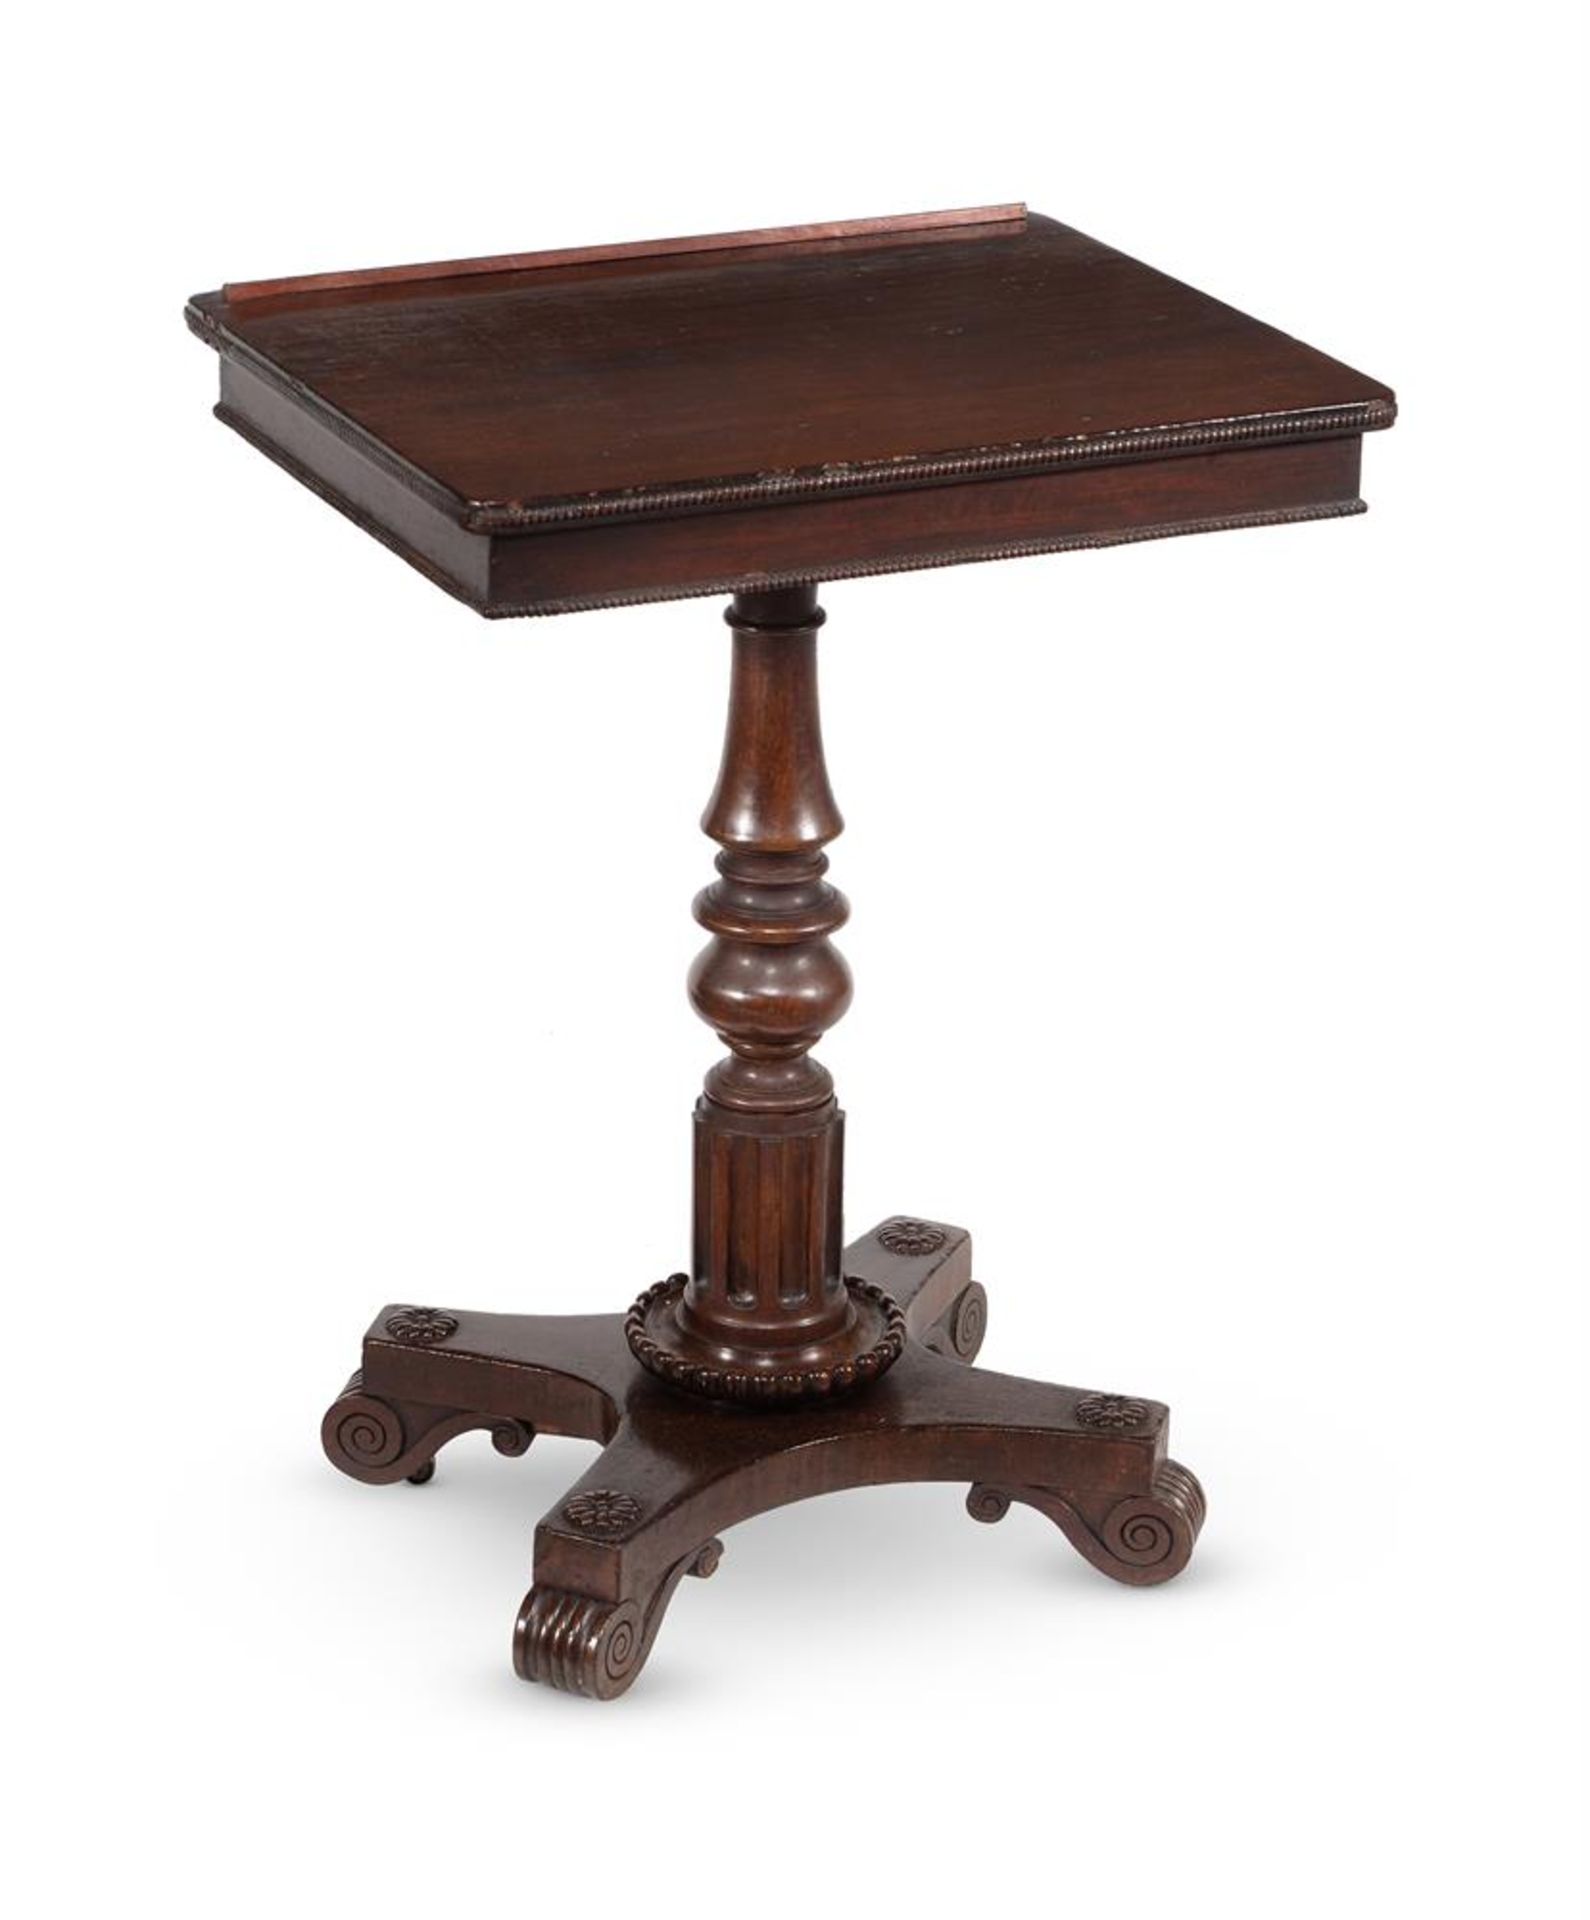 A REGENCY MAHOGANY LIBRARY READING TABLE, ATTRIBUTED TO GILLOWS, CIRCA 1815 - Image 2 of 5